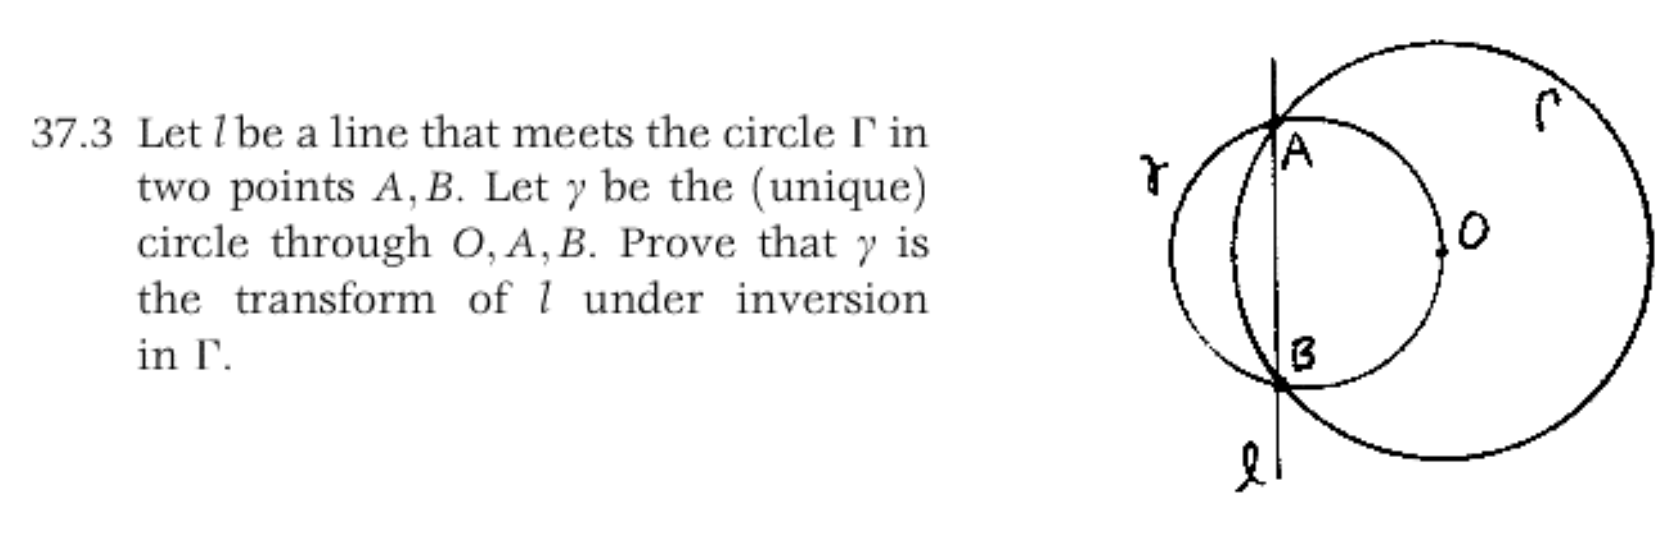 37.3 Let 1be a line that meets the circle in
two points A, B. Let y be the (unique)
circle through O, A, B. Prove that y is
A
the transform of l under inversion
in
